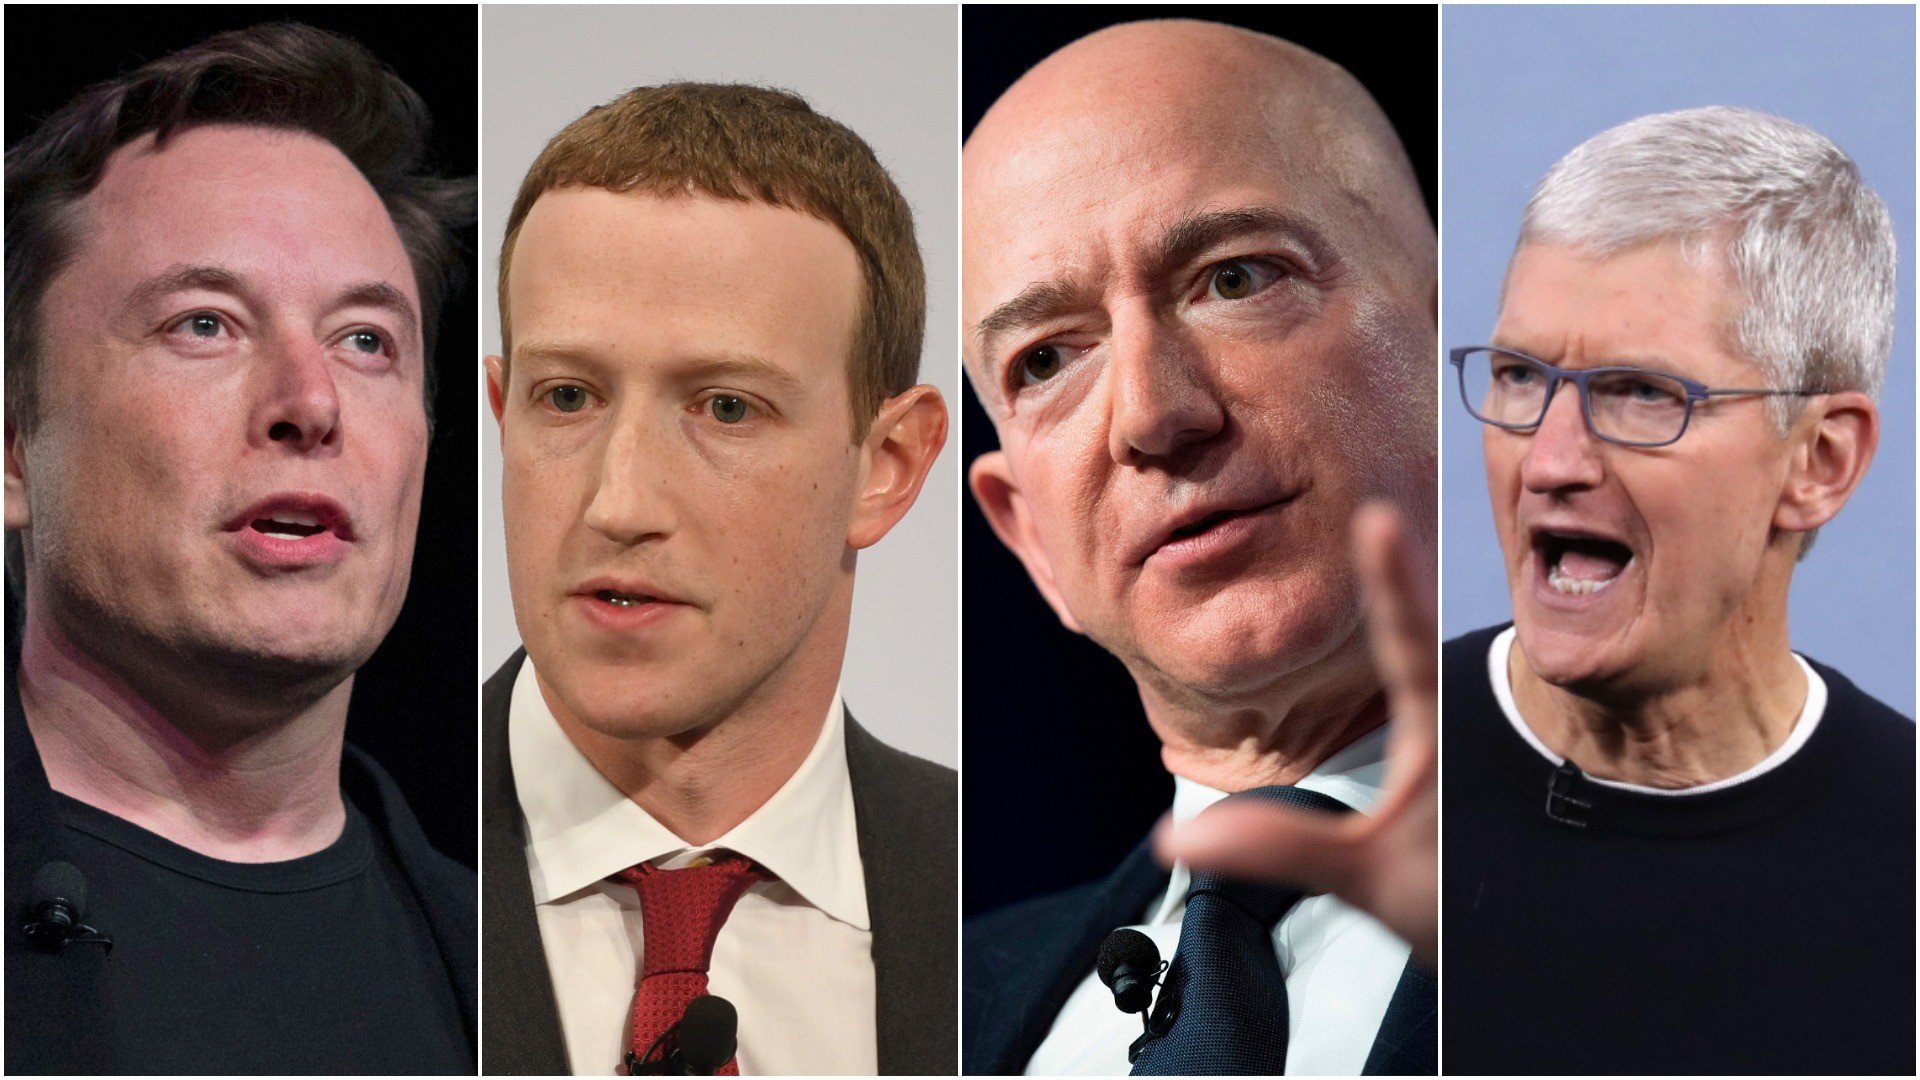 Elon Musk, Mark Zuckerberg, Jeff Bezos and others: which billionaire CEOs are friends and which are rivals? Photo: AFP, AP, DPA